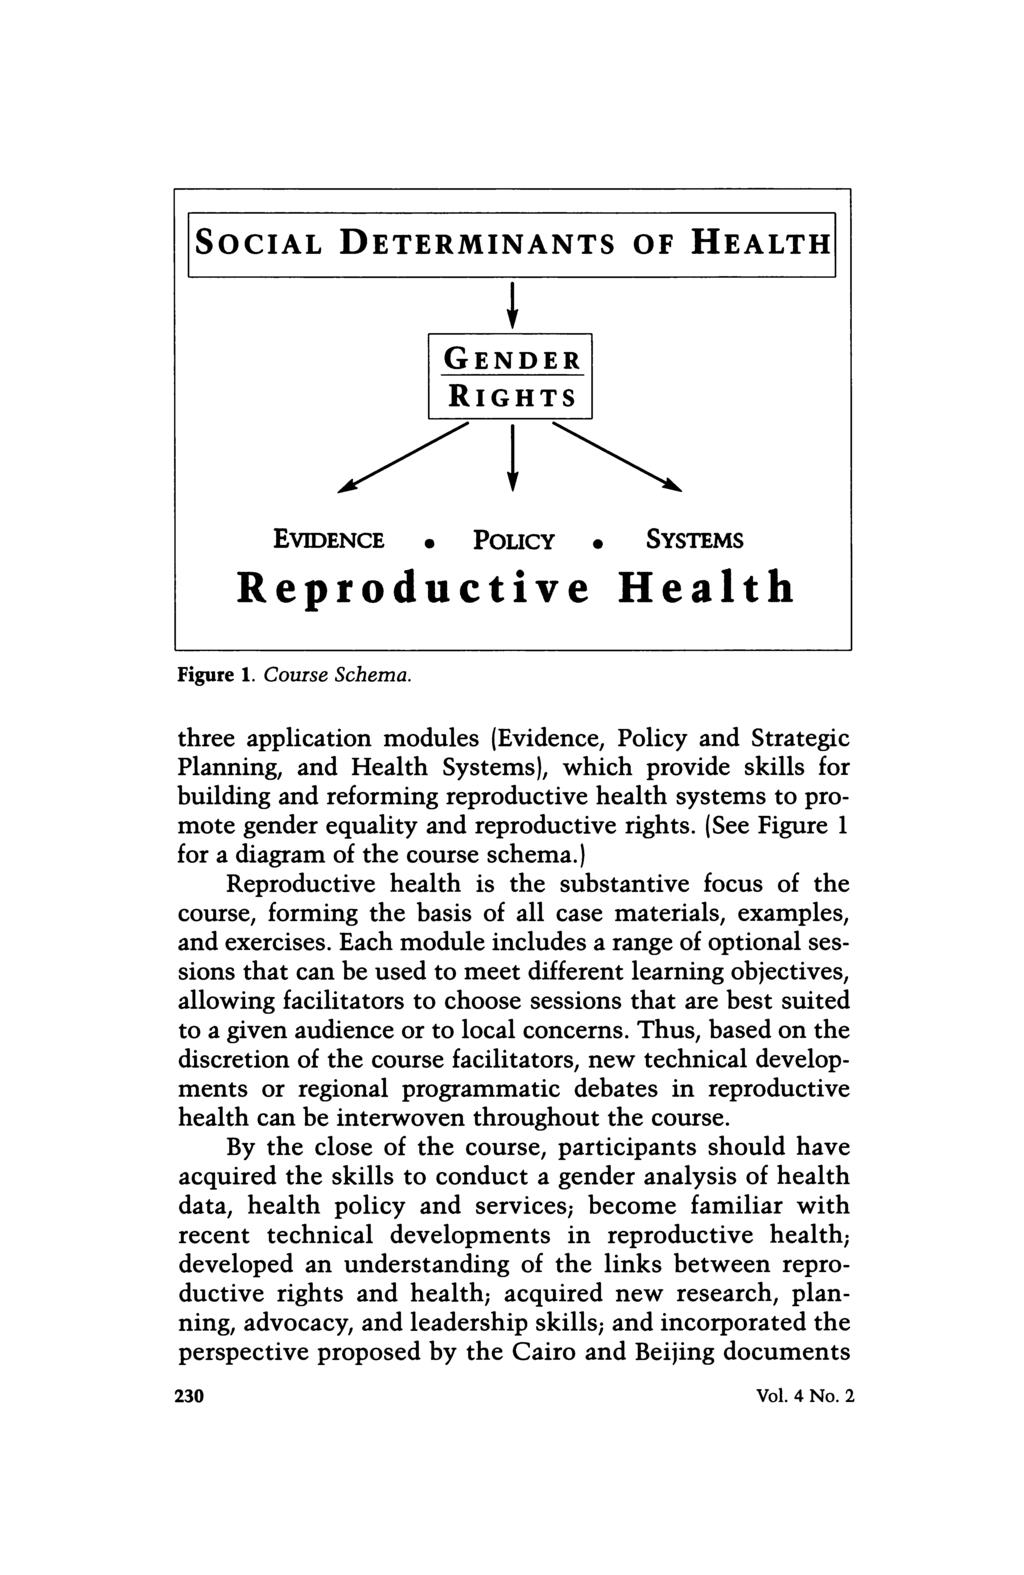 SOCIAL DETERMINANTS OF HEALTH GENDER RIGHTS EVIDENCE. POLICY. SYSTEMS Reproductive Health Figure 1. Course Schema.